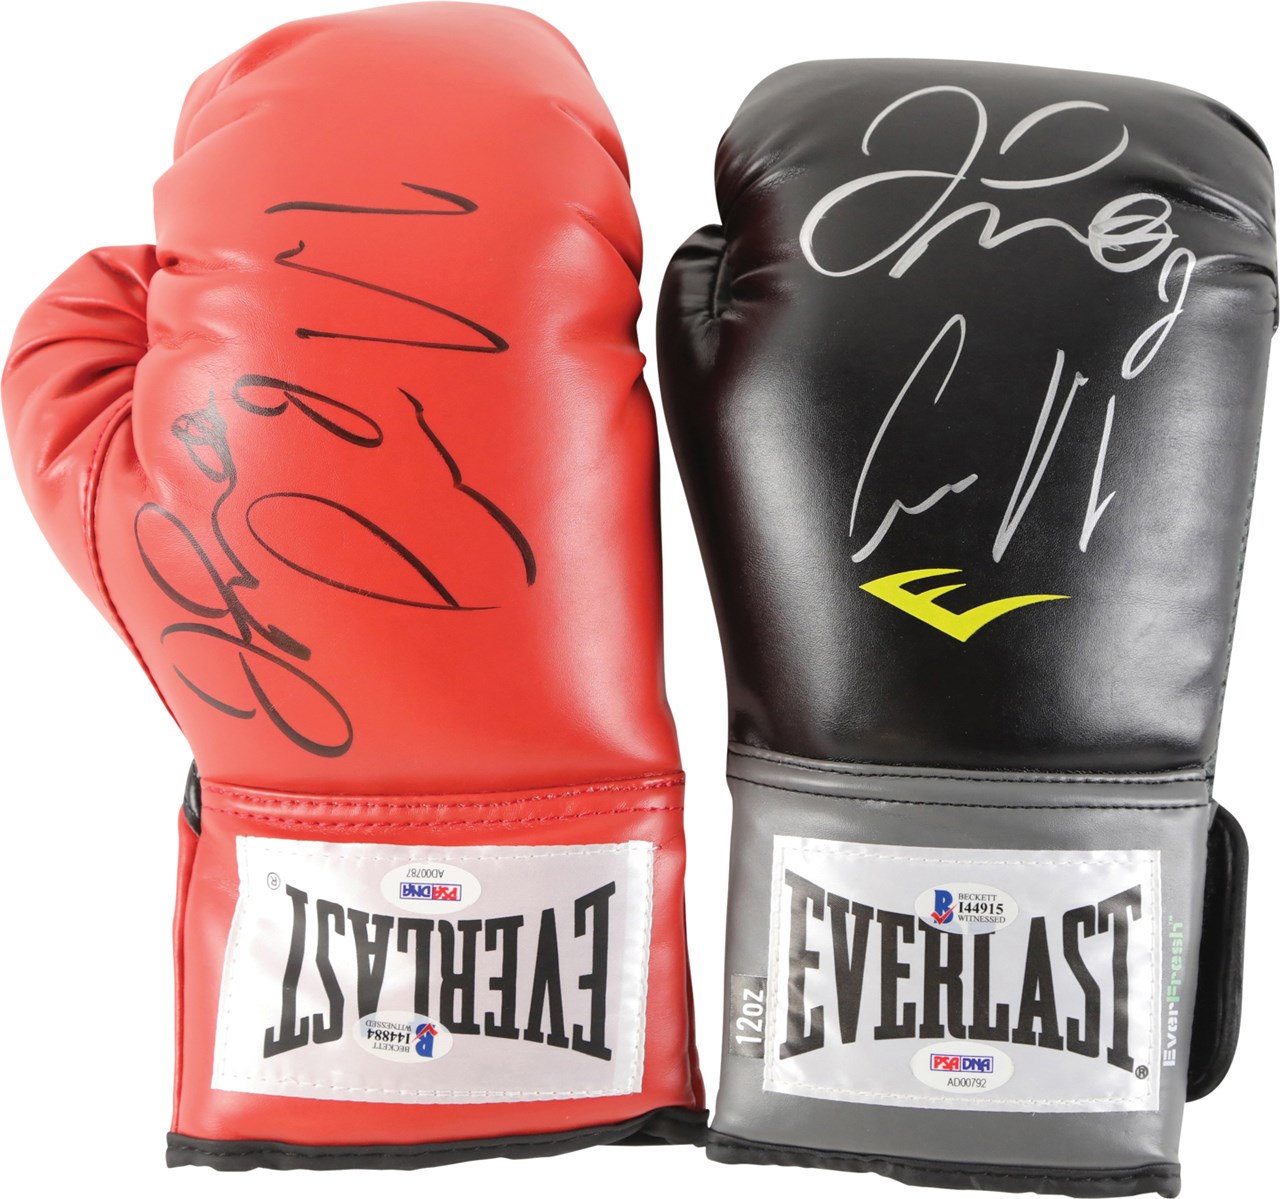 Muhammad Ali & Boxing - Conor McGregor & Floyd Mayweather Dual-Signed Boxing Gloves (PSA & Beckett) (2)